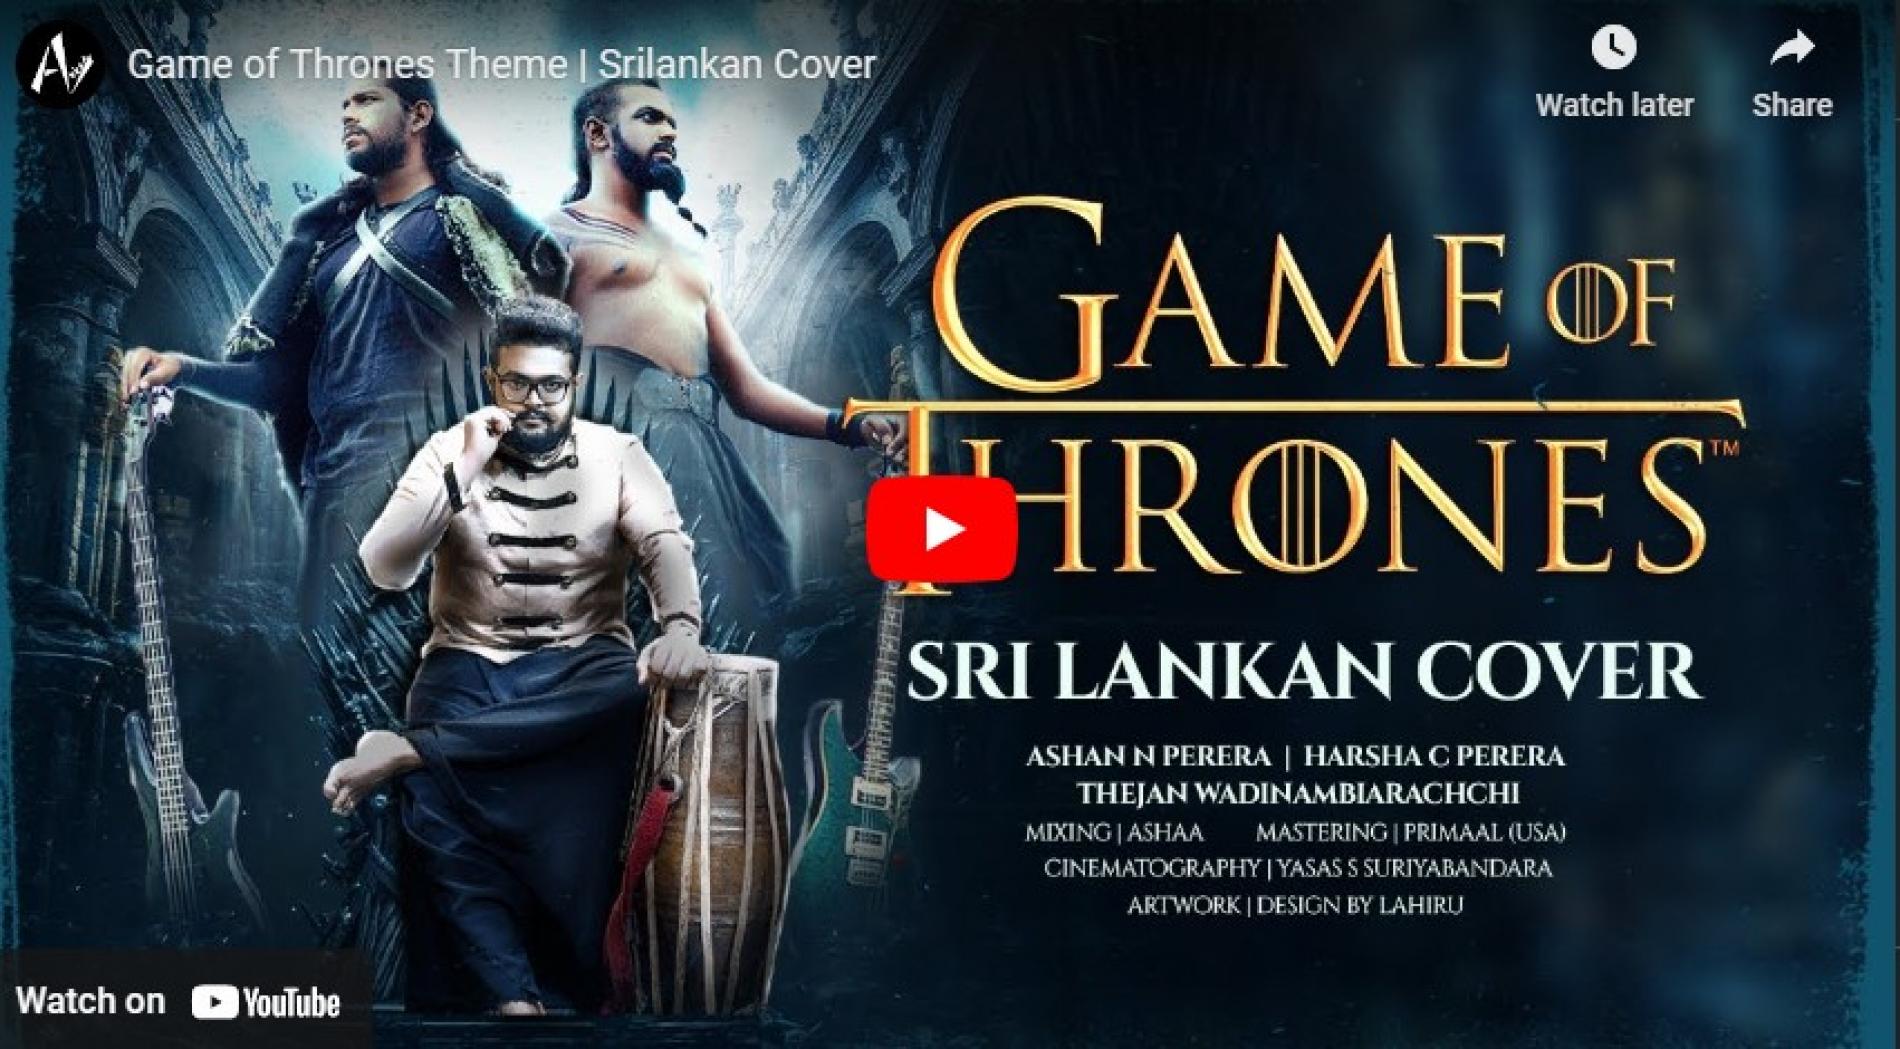 New Music : Game of Thrones Theme | Srilankan Cover